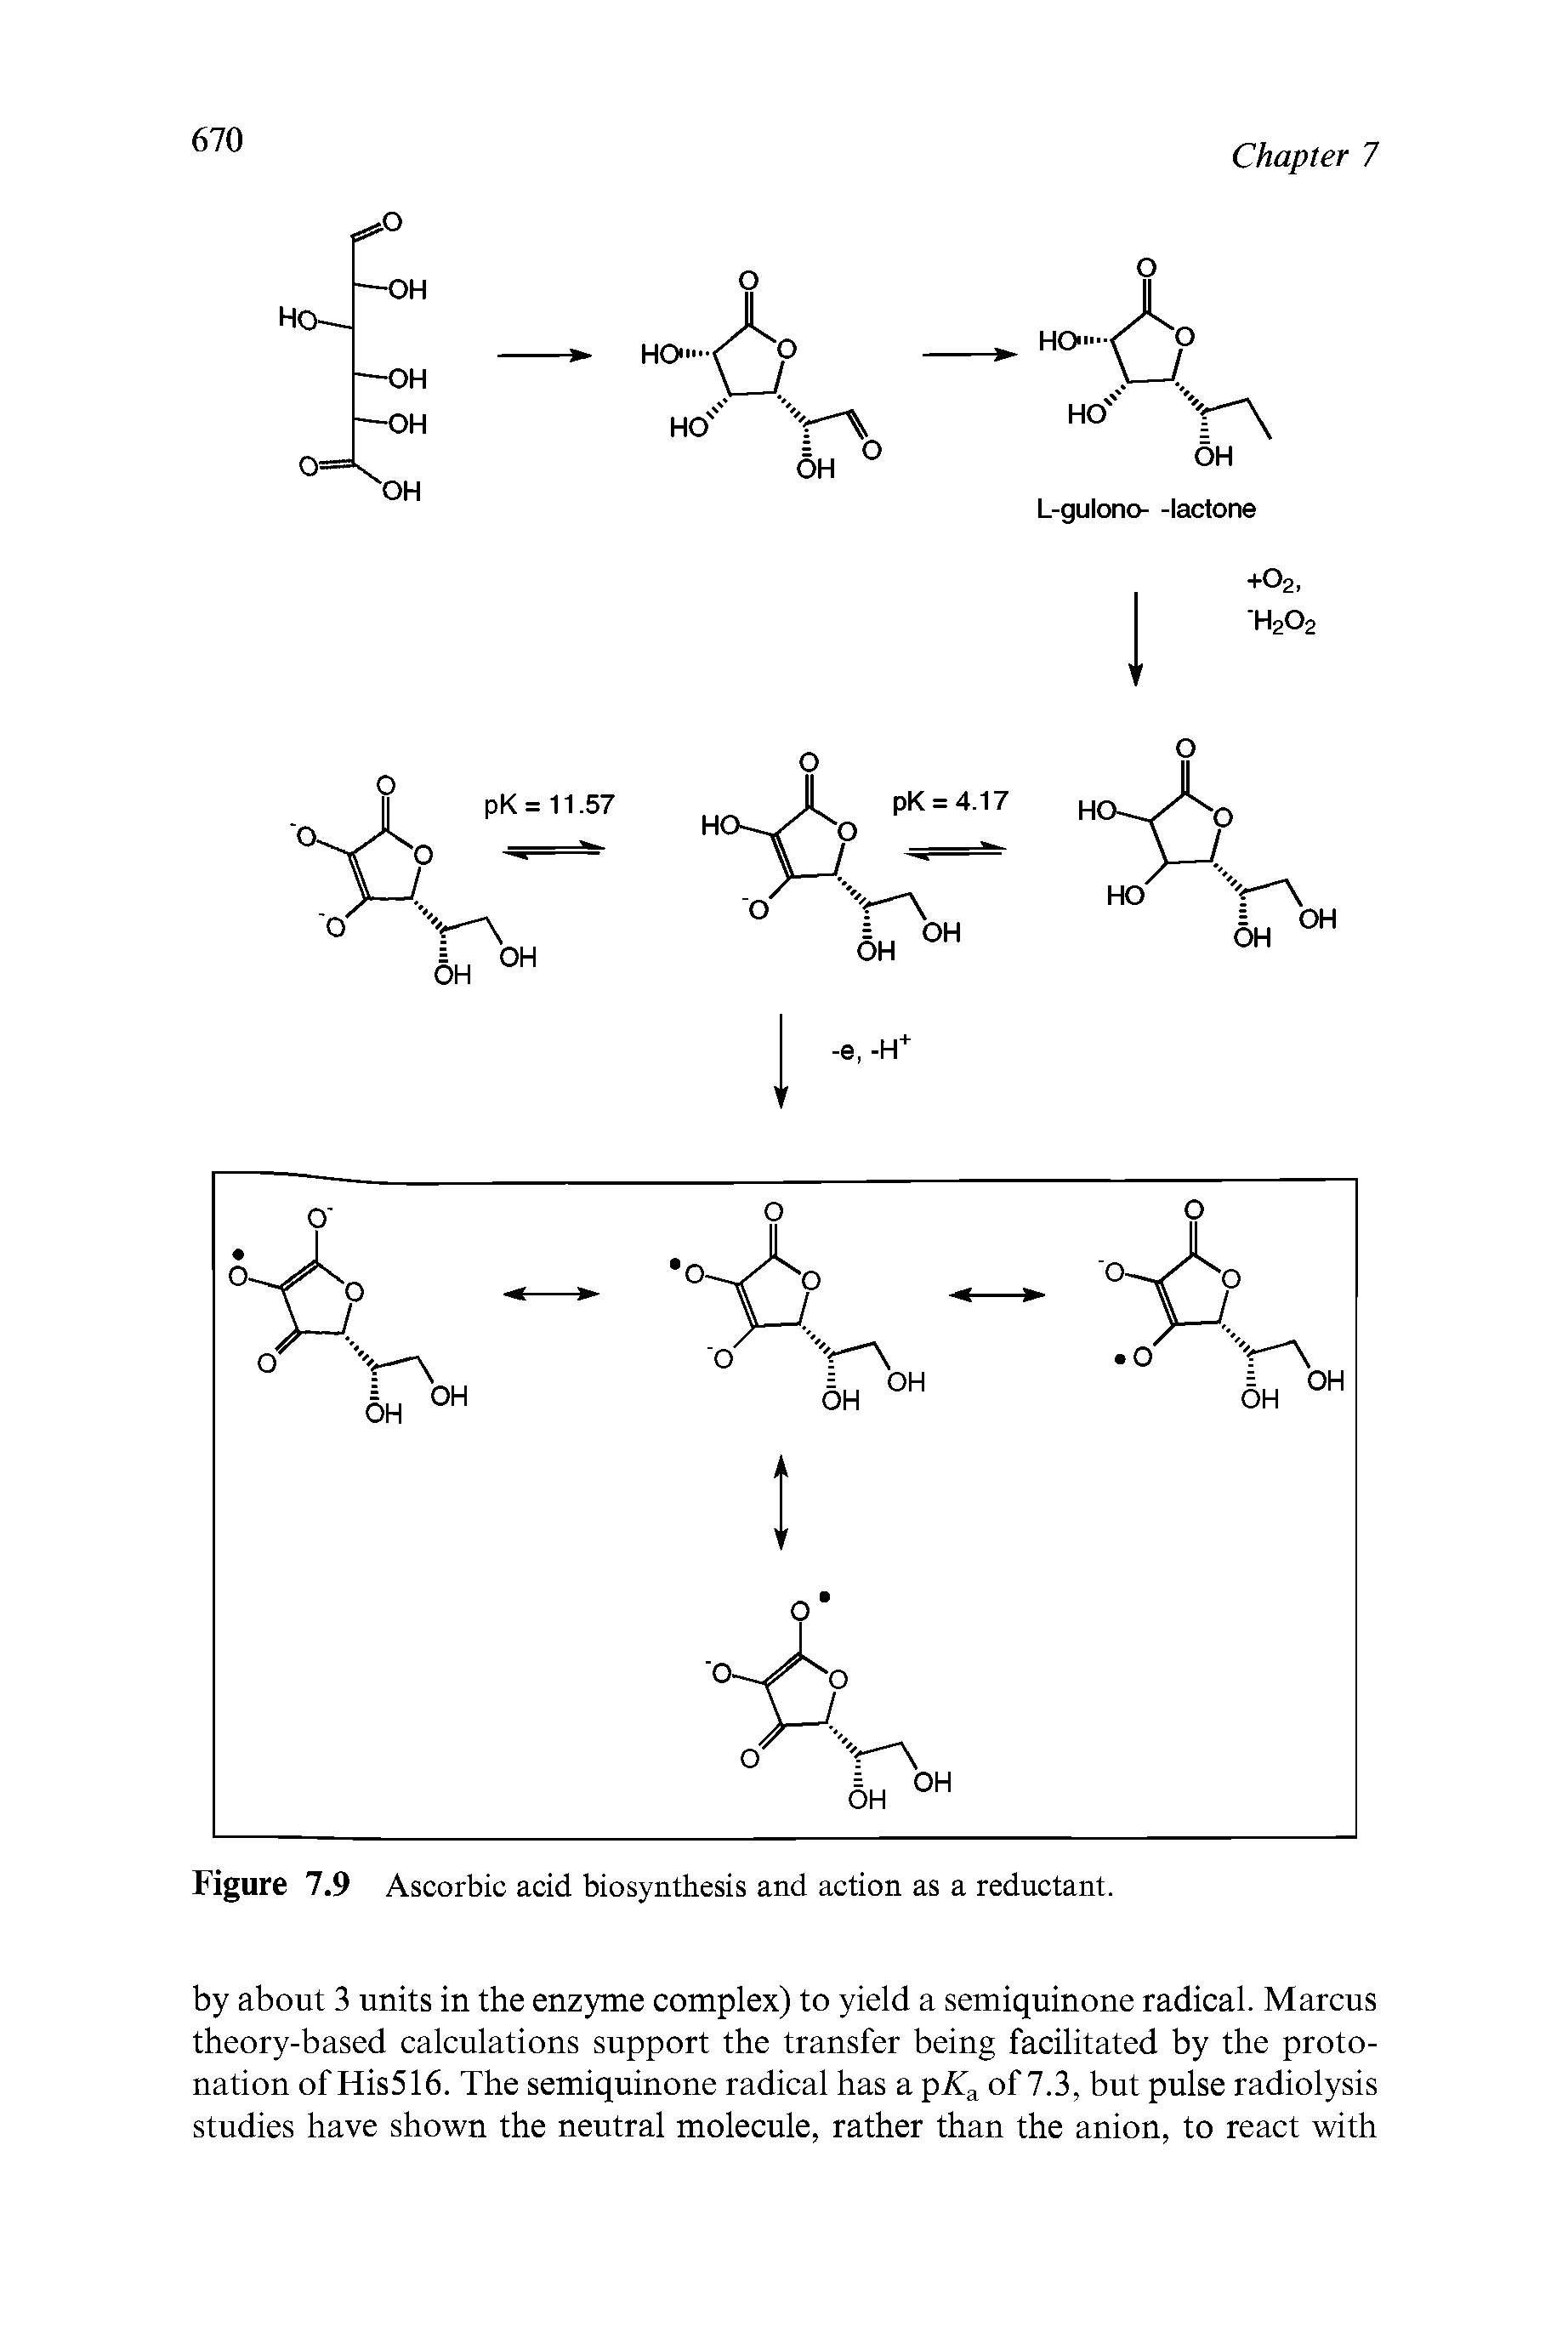 Figure 7.9 Ascorbic acid biosynthesis and action as a reductant.